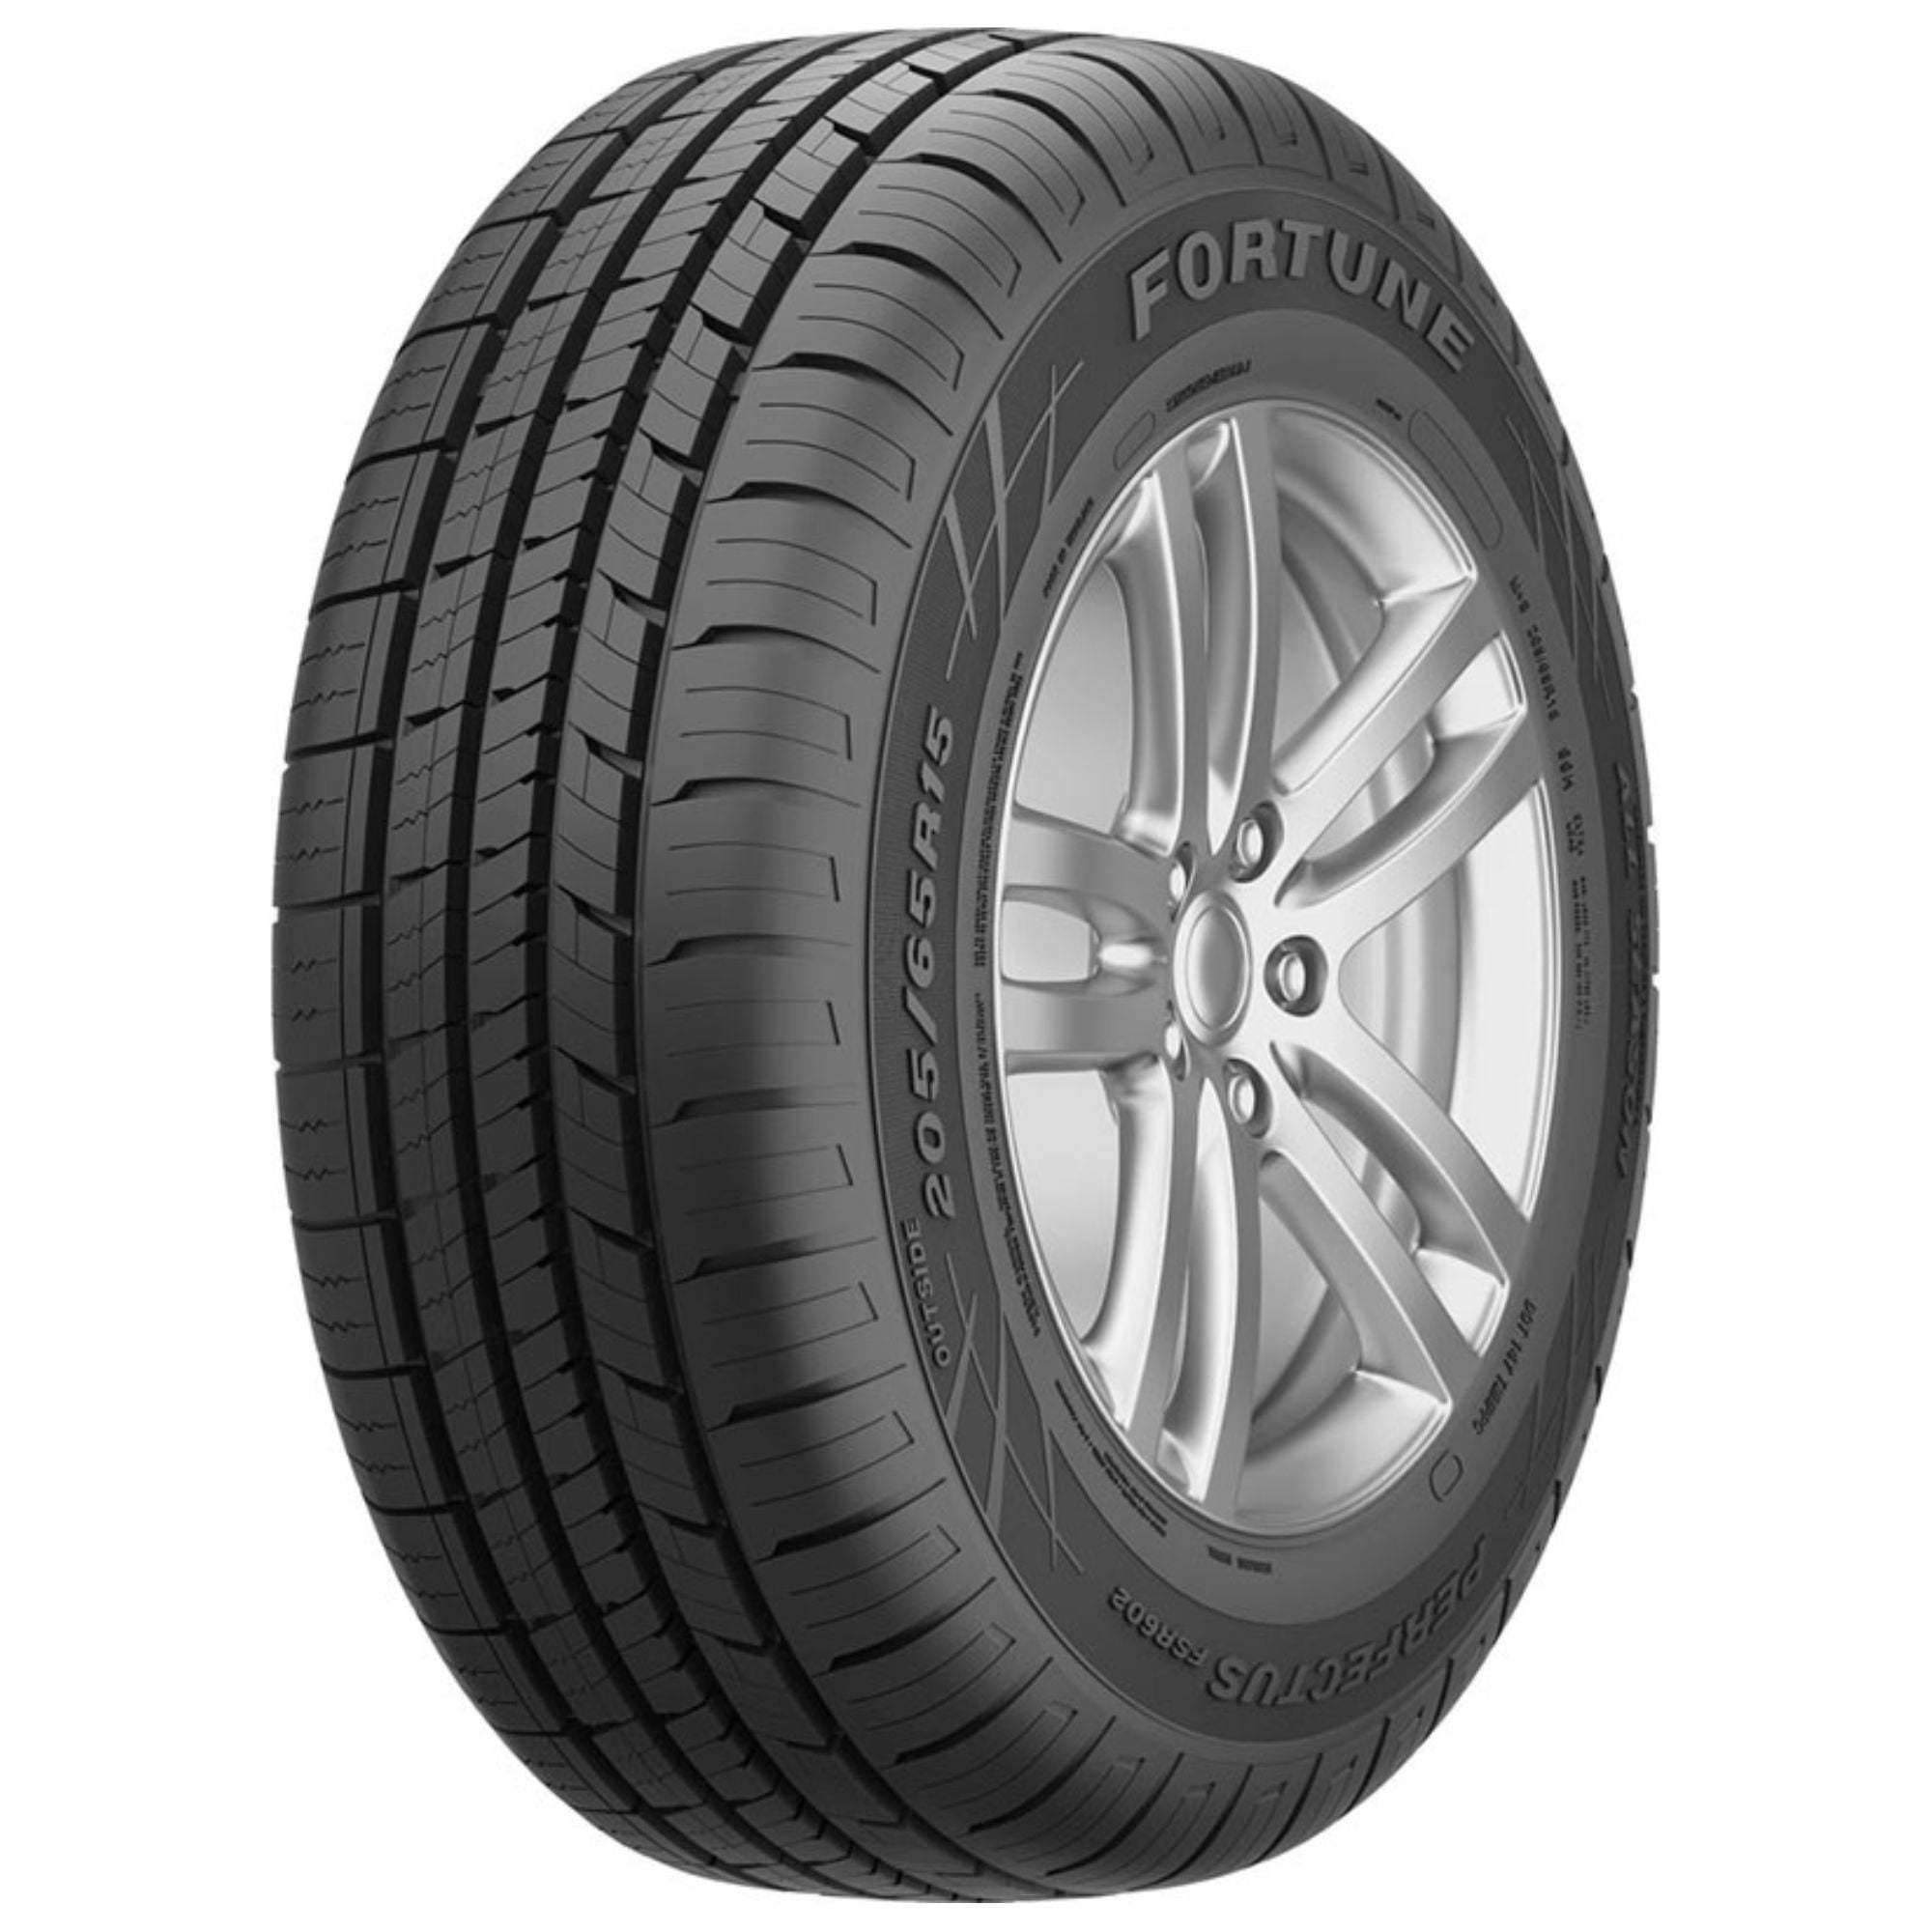 Continental TrueContact Tour 175/65R15 84H All Season BSW Tire